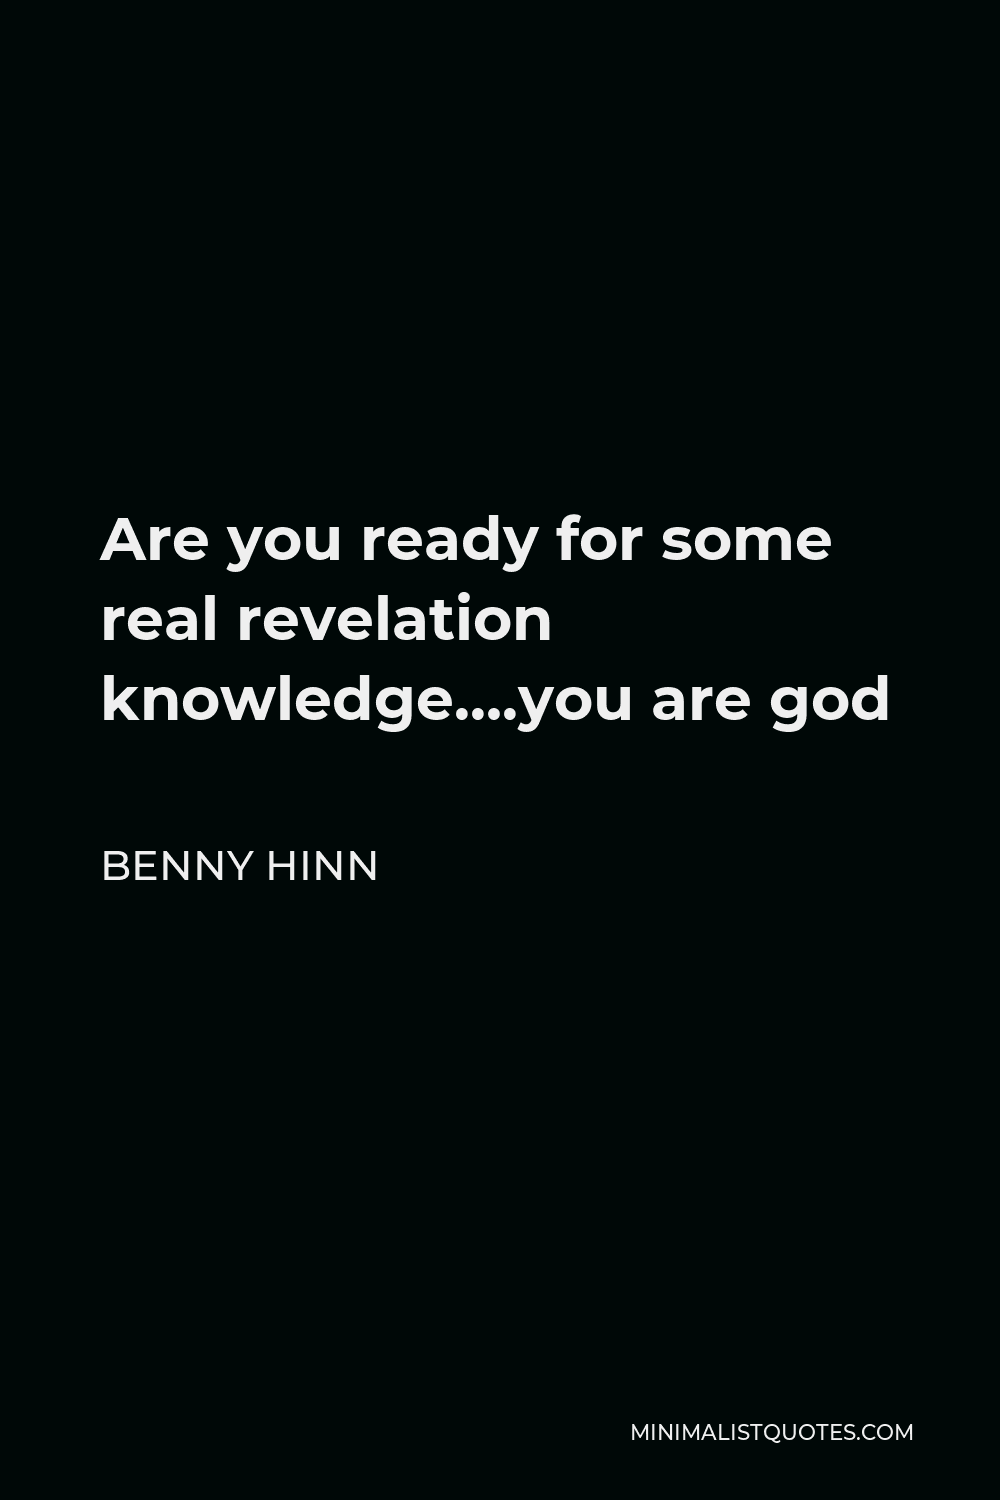 Benny Hinn Quote - Are you ready for some real revelation knowledge….you are god